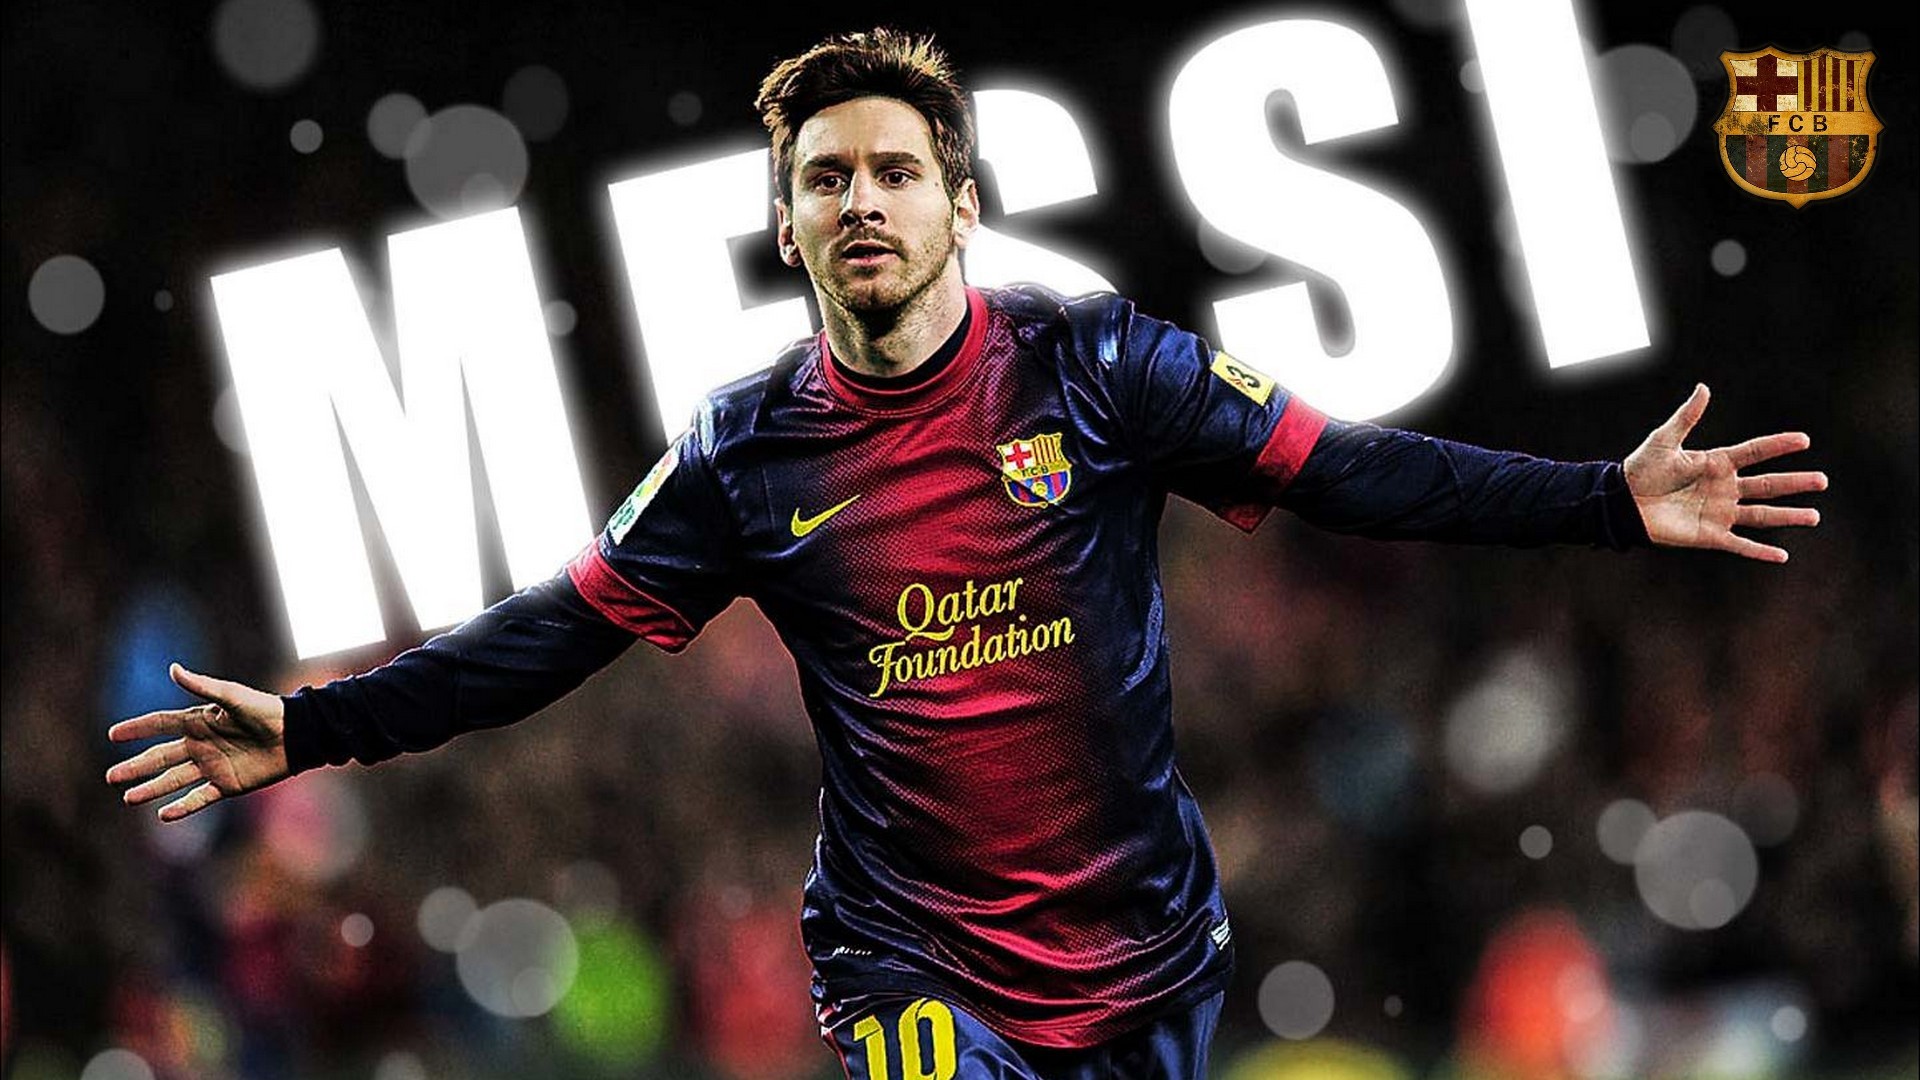 Leo Messi Backgrounds HD With Resolution 1920X1080 pixel. You can make this wallpaper for your Mac or Windows Desktop Background, iPhone, Android or Tablet and another Smartphone device for free